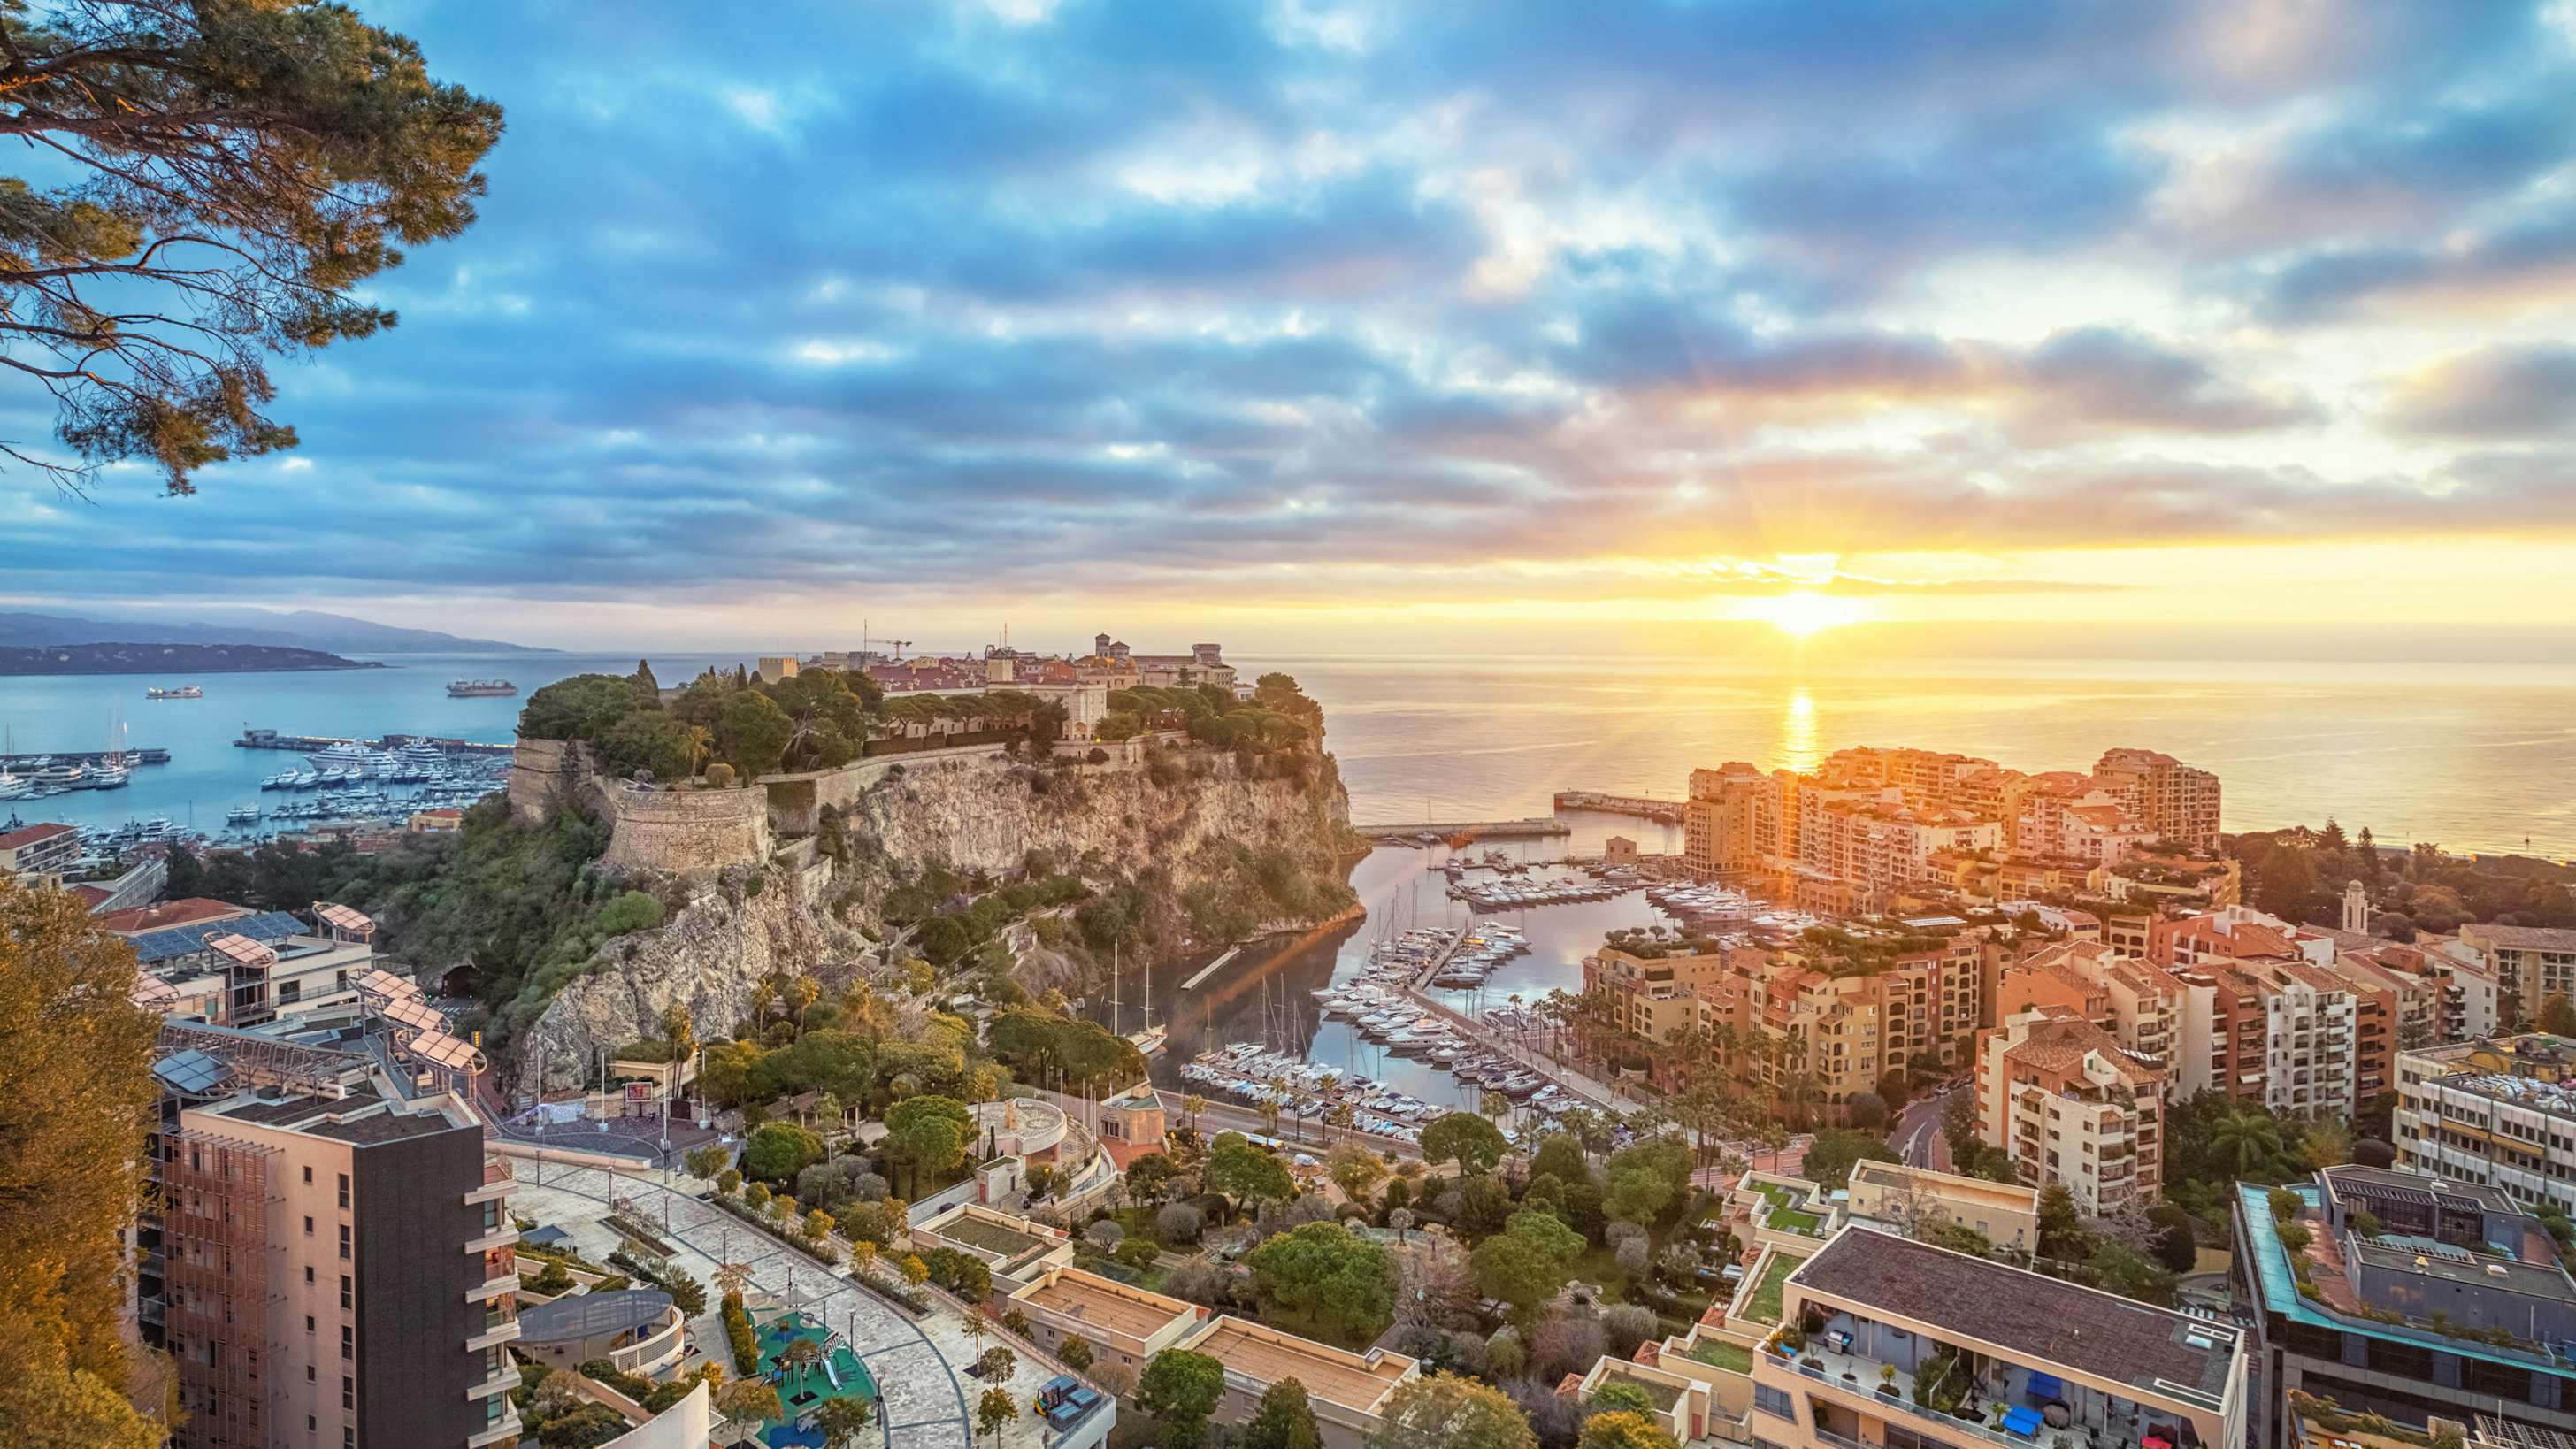 Sunset view over the lavish cityscape of Monaco, a premier destination for luxury yacht charters on the French Riviera